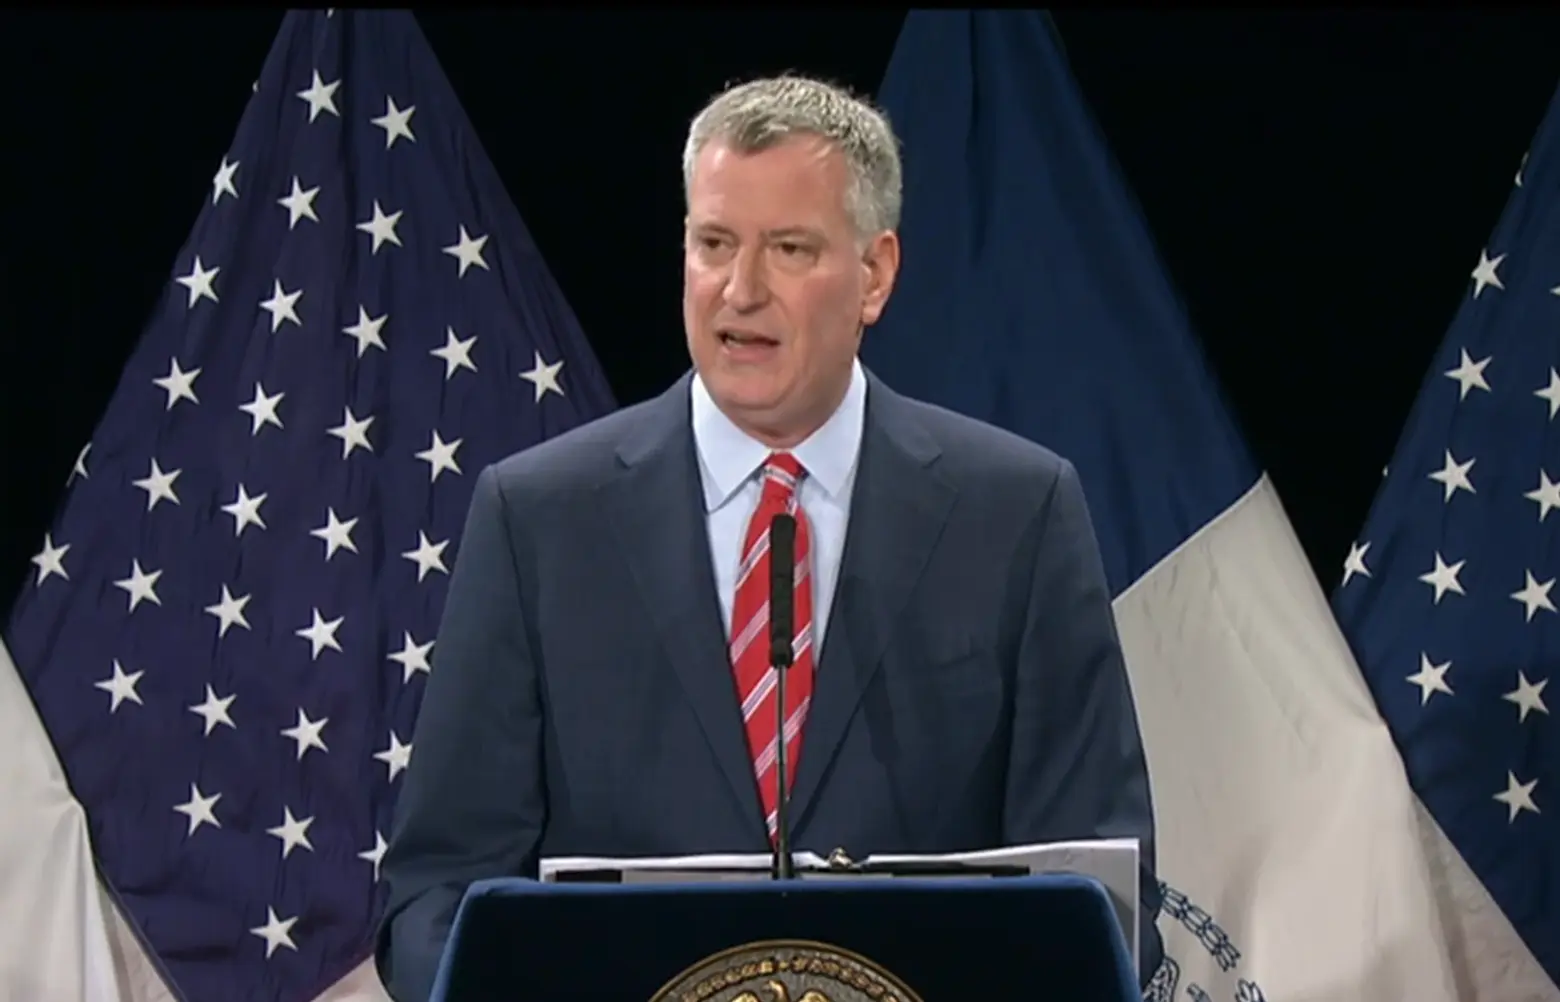 HIGHLIGHTS: De Blasio Announces Plans for More Affordable Housing and a New City-Wide Ferry Service